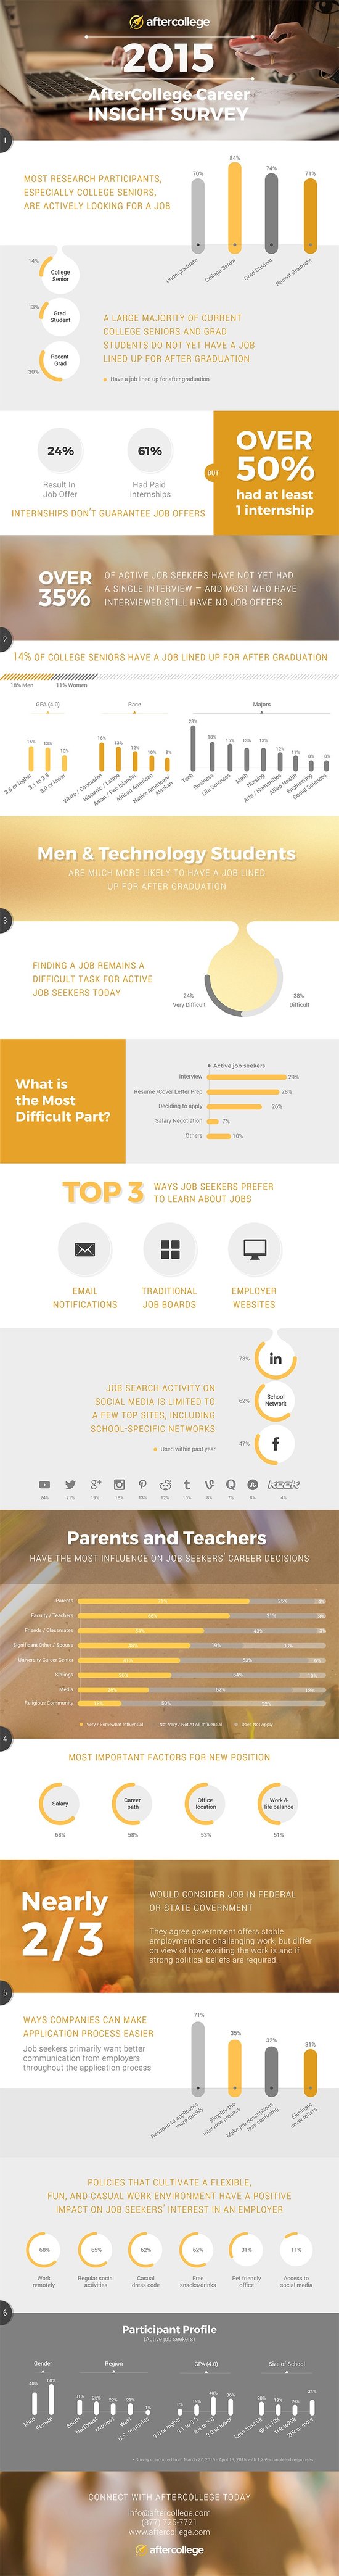 AfterCollege_Annual_Career_Insights_Infographic